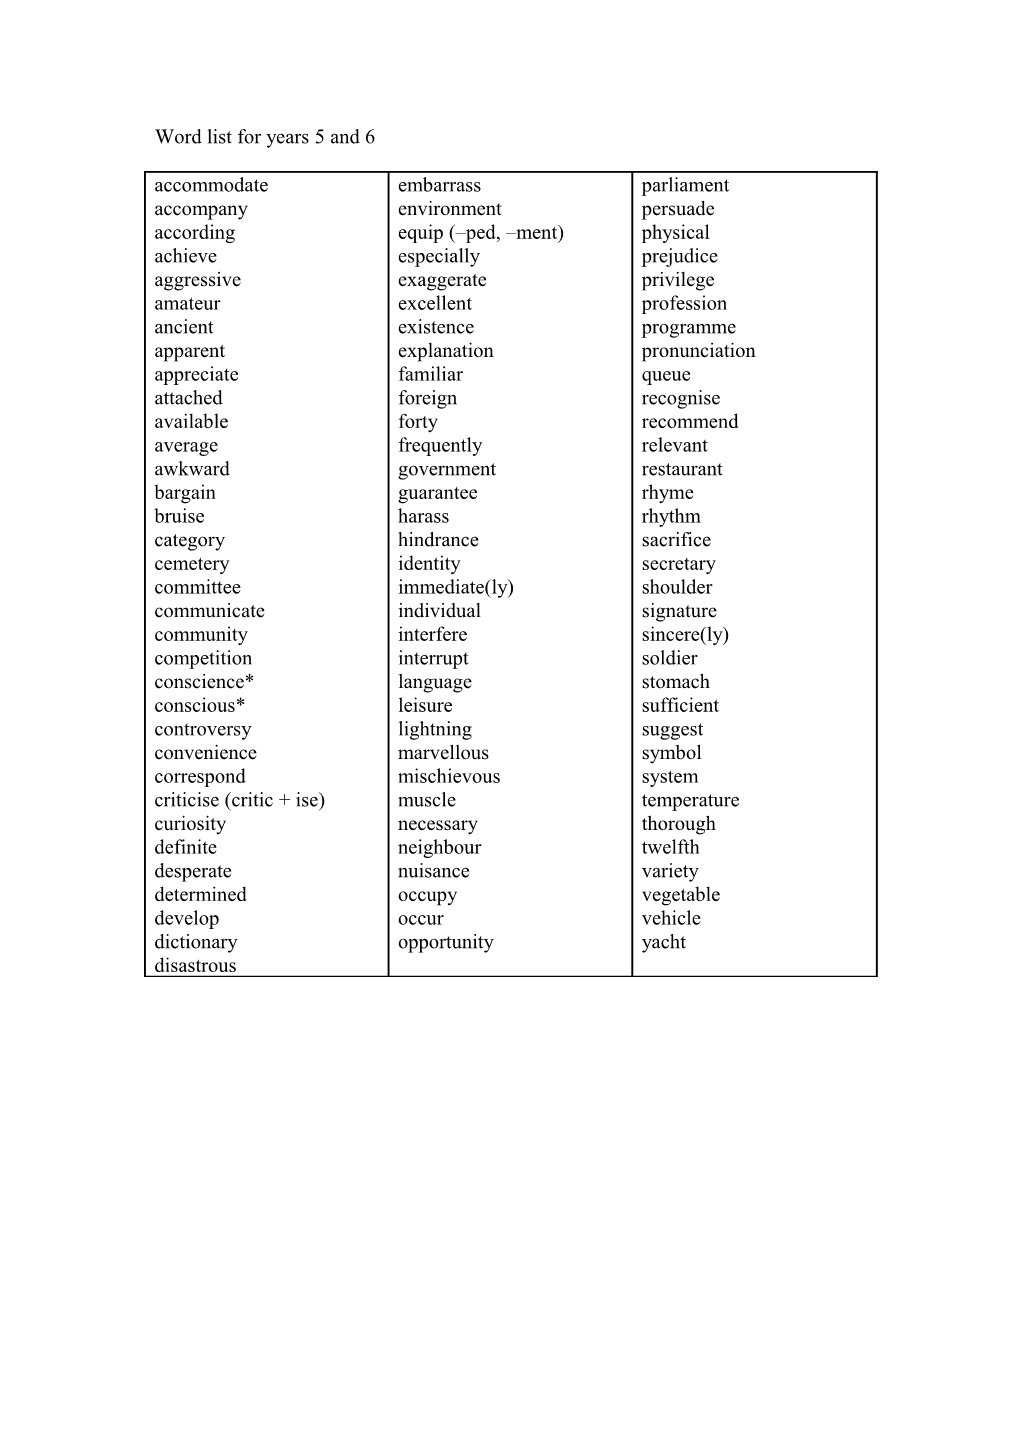 Word List for Years 5 and 6